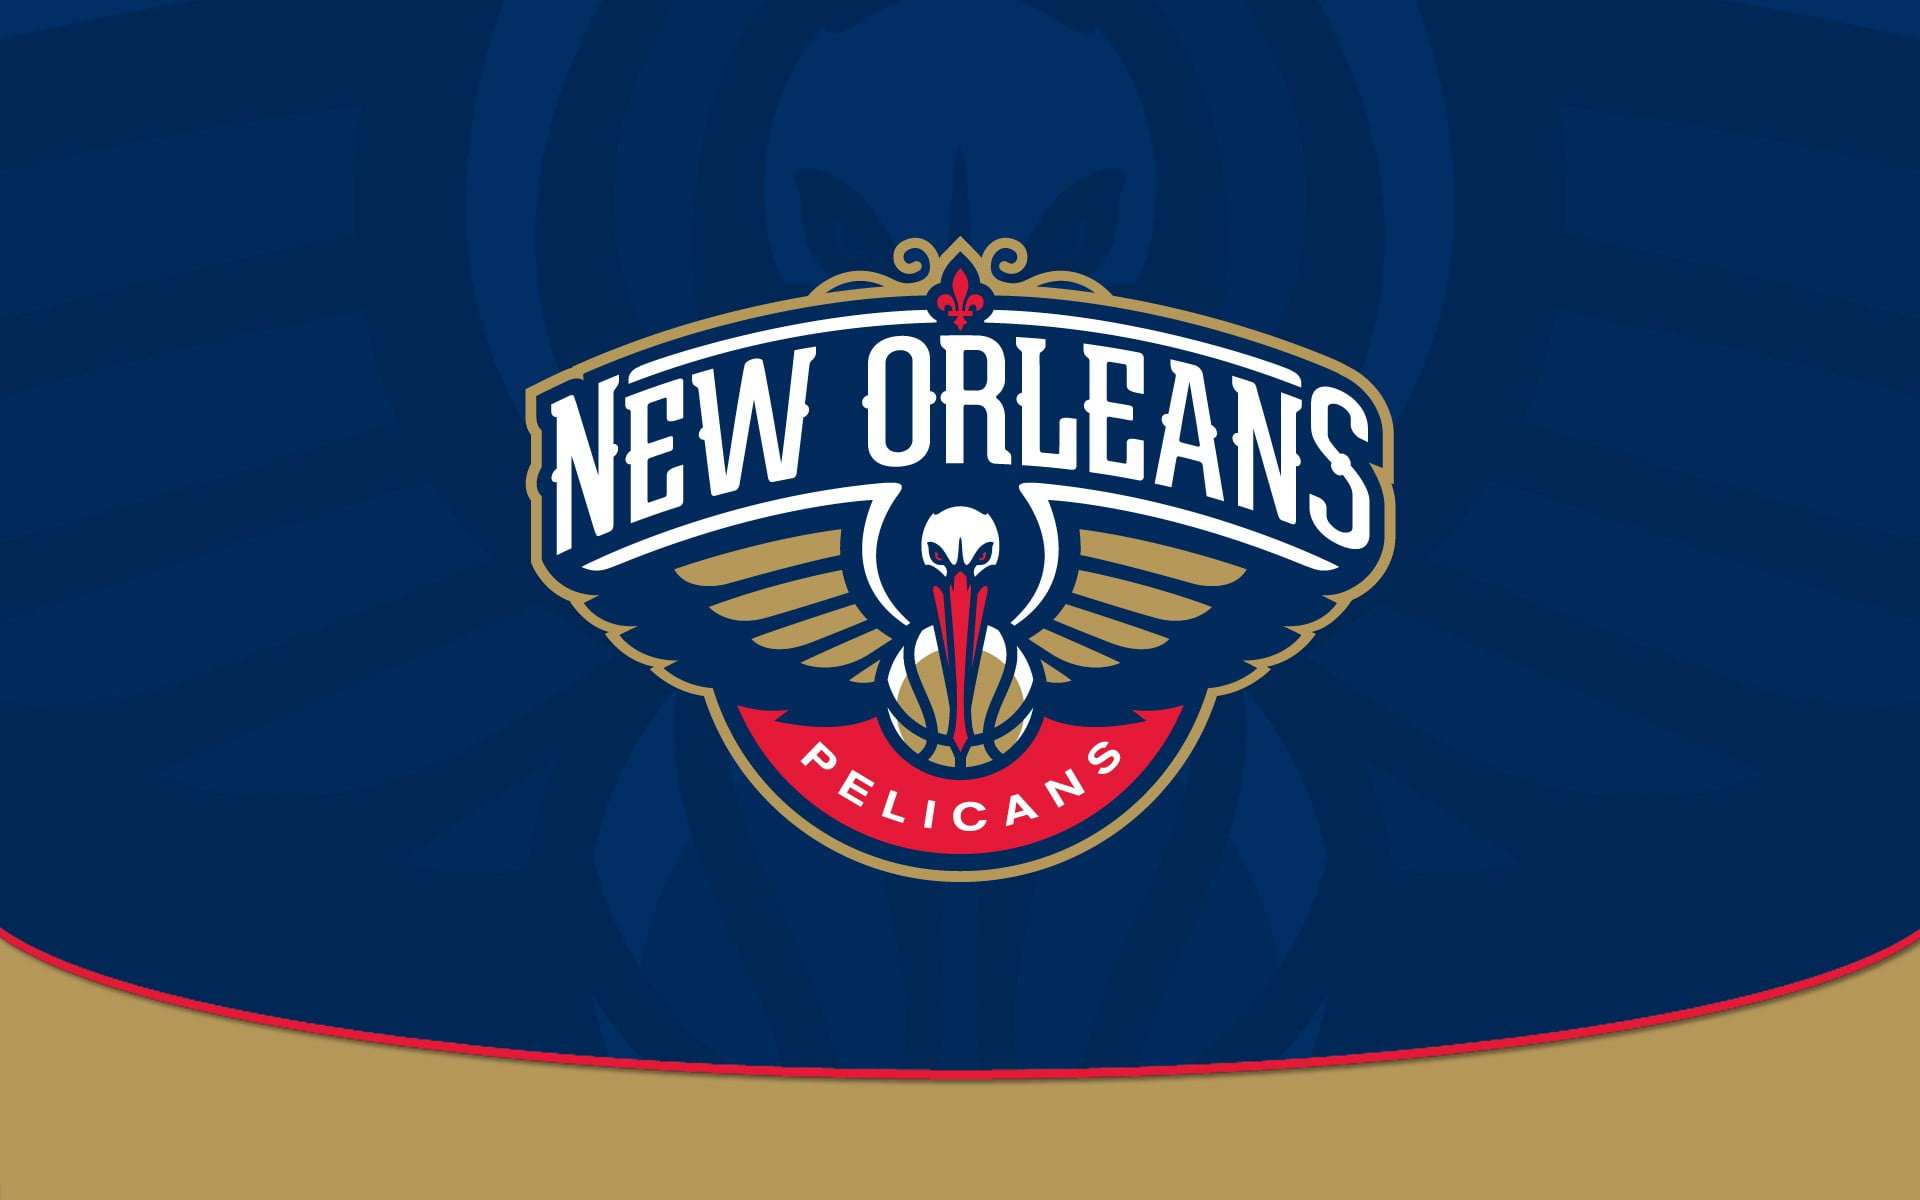 New Orleans Pelicans logo, NBA, basketball, New Orleans Pelicans, sports